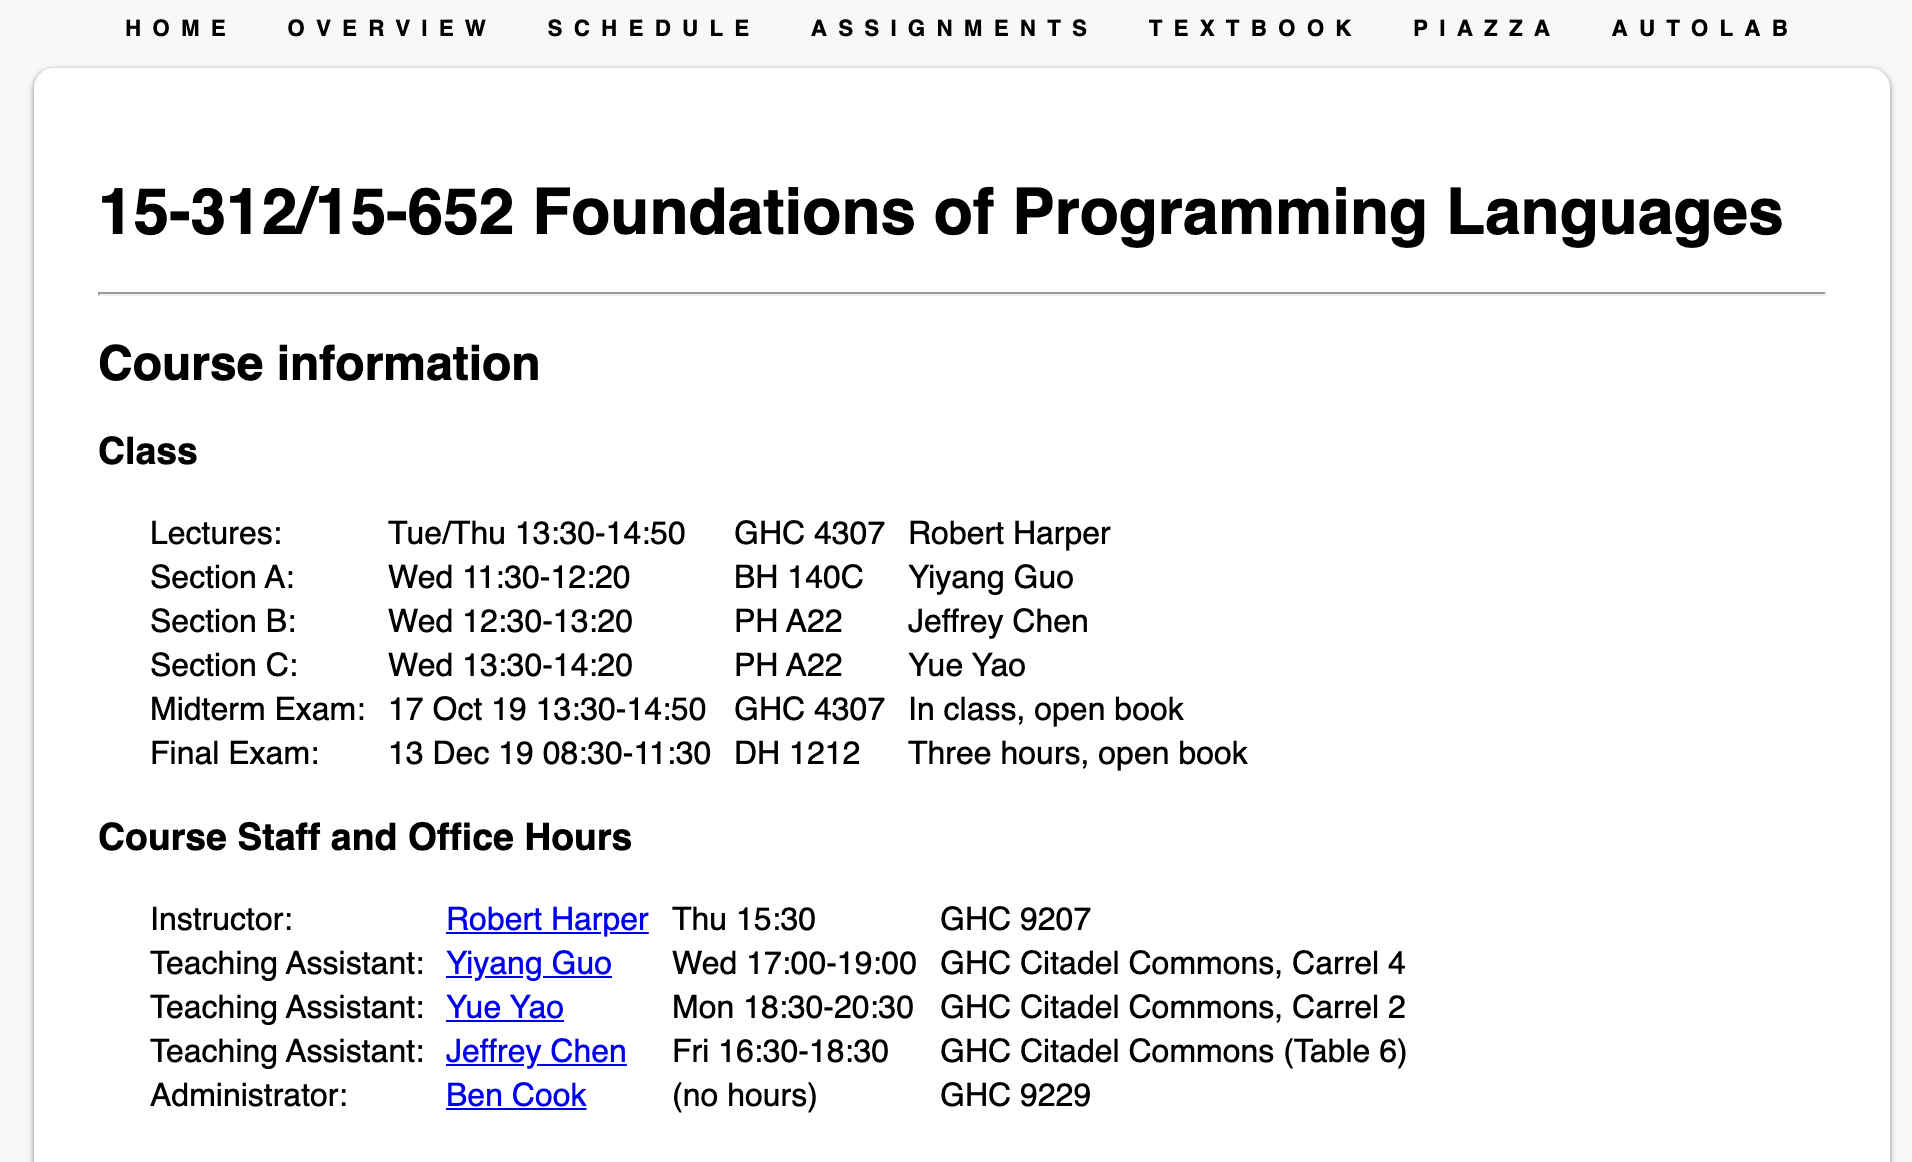 Fall 2019 instance of "Foundations of Programming Languages"